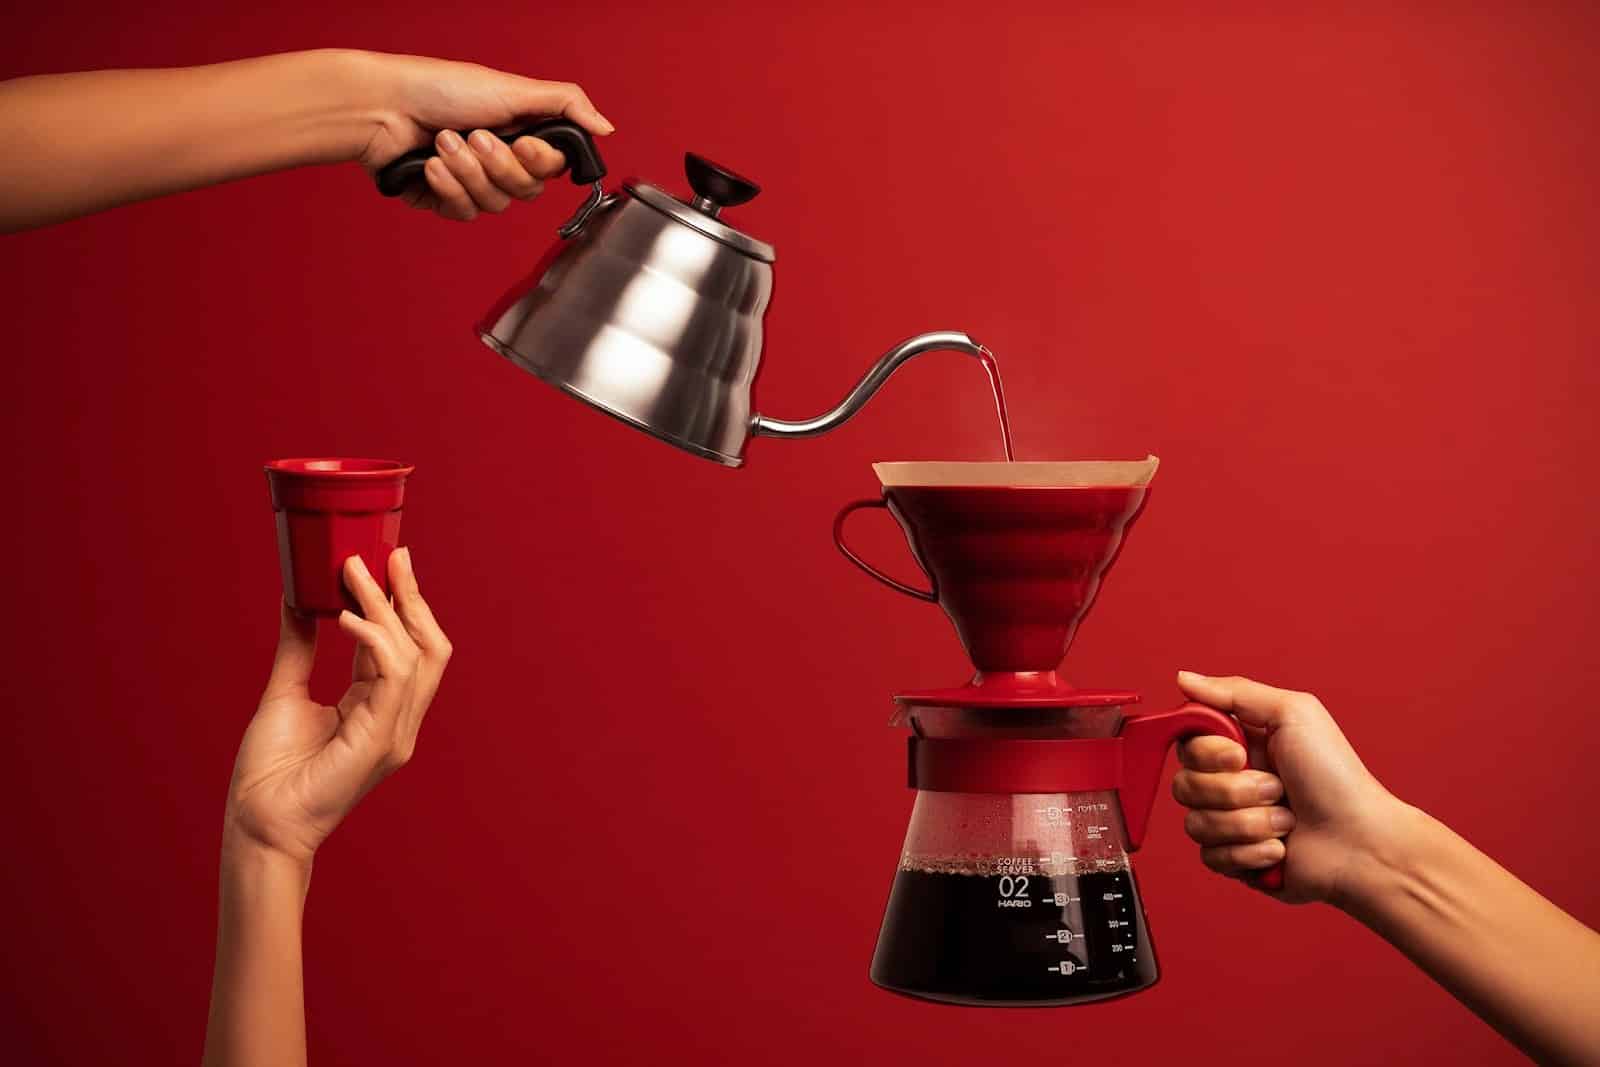 How to Use a Pour-Over Coffee Maker